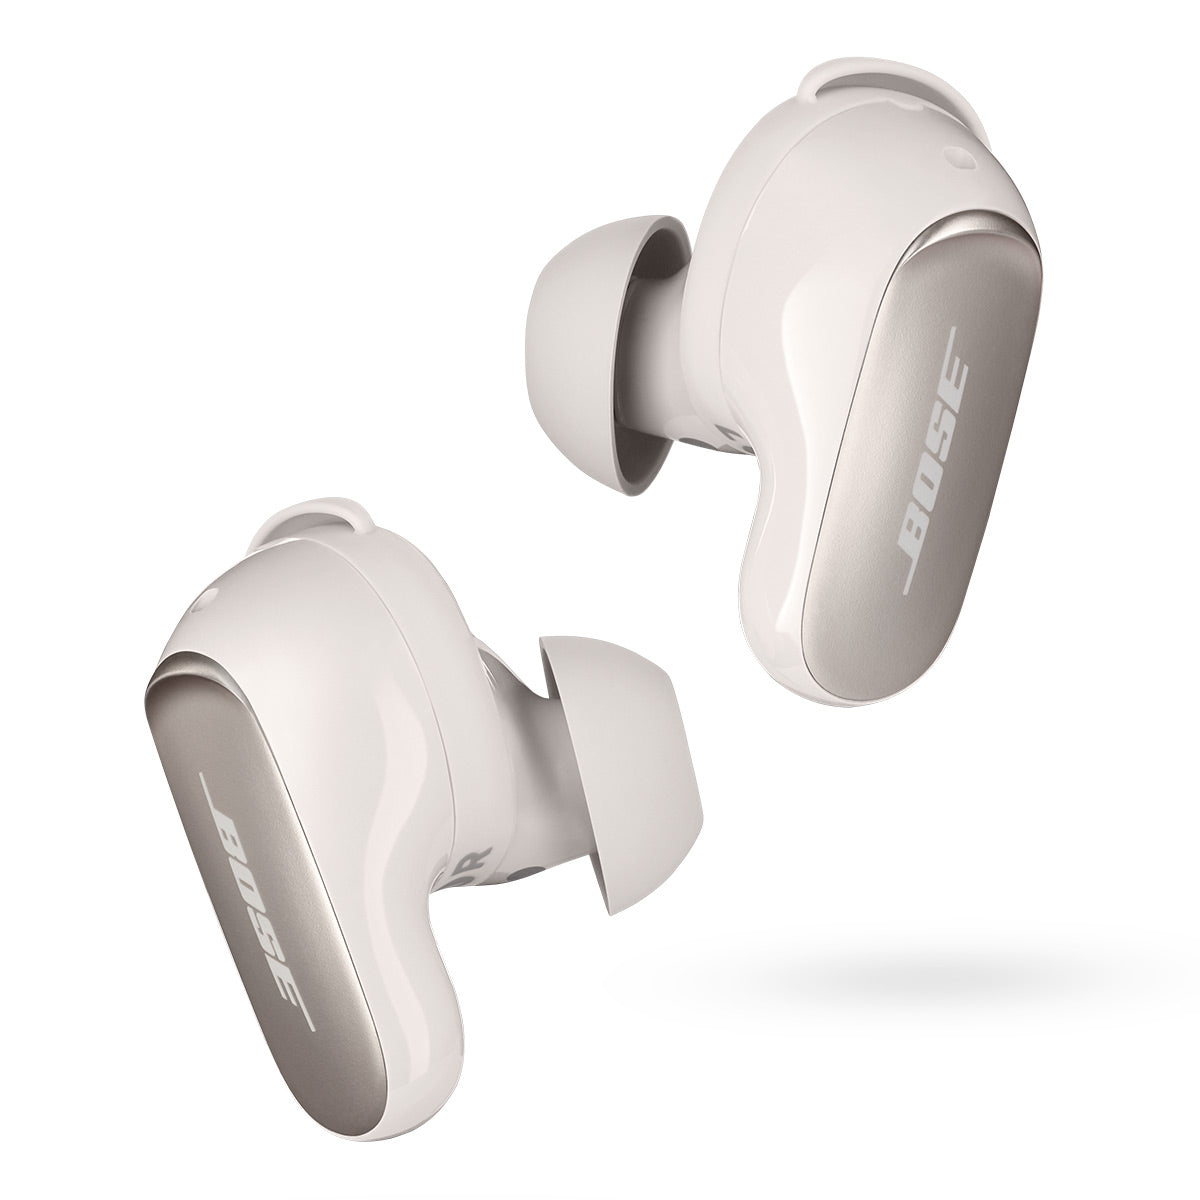 Bose QuietComfort Headphones with Active Noise Cancellation with QuietComfort Ultra Wireless Noise Cancelling Earbuds (White)